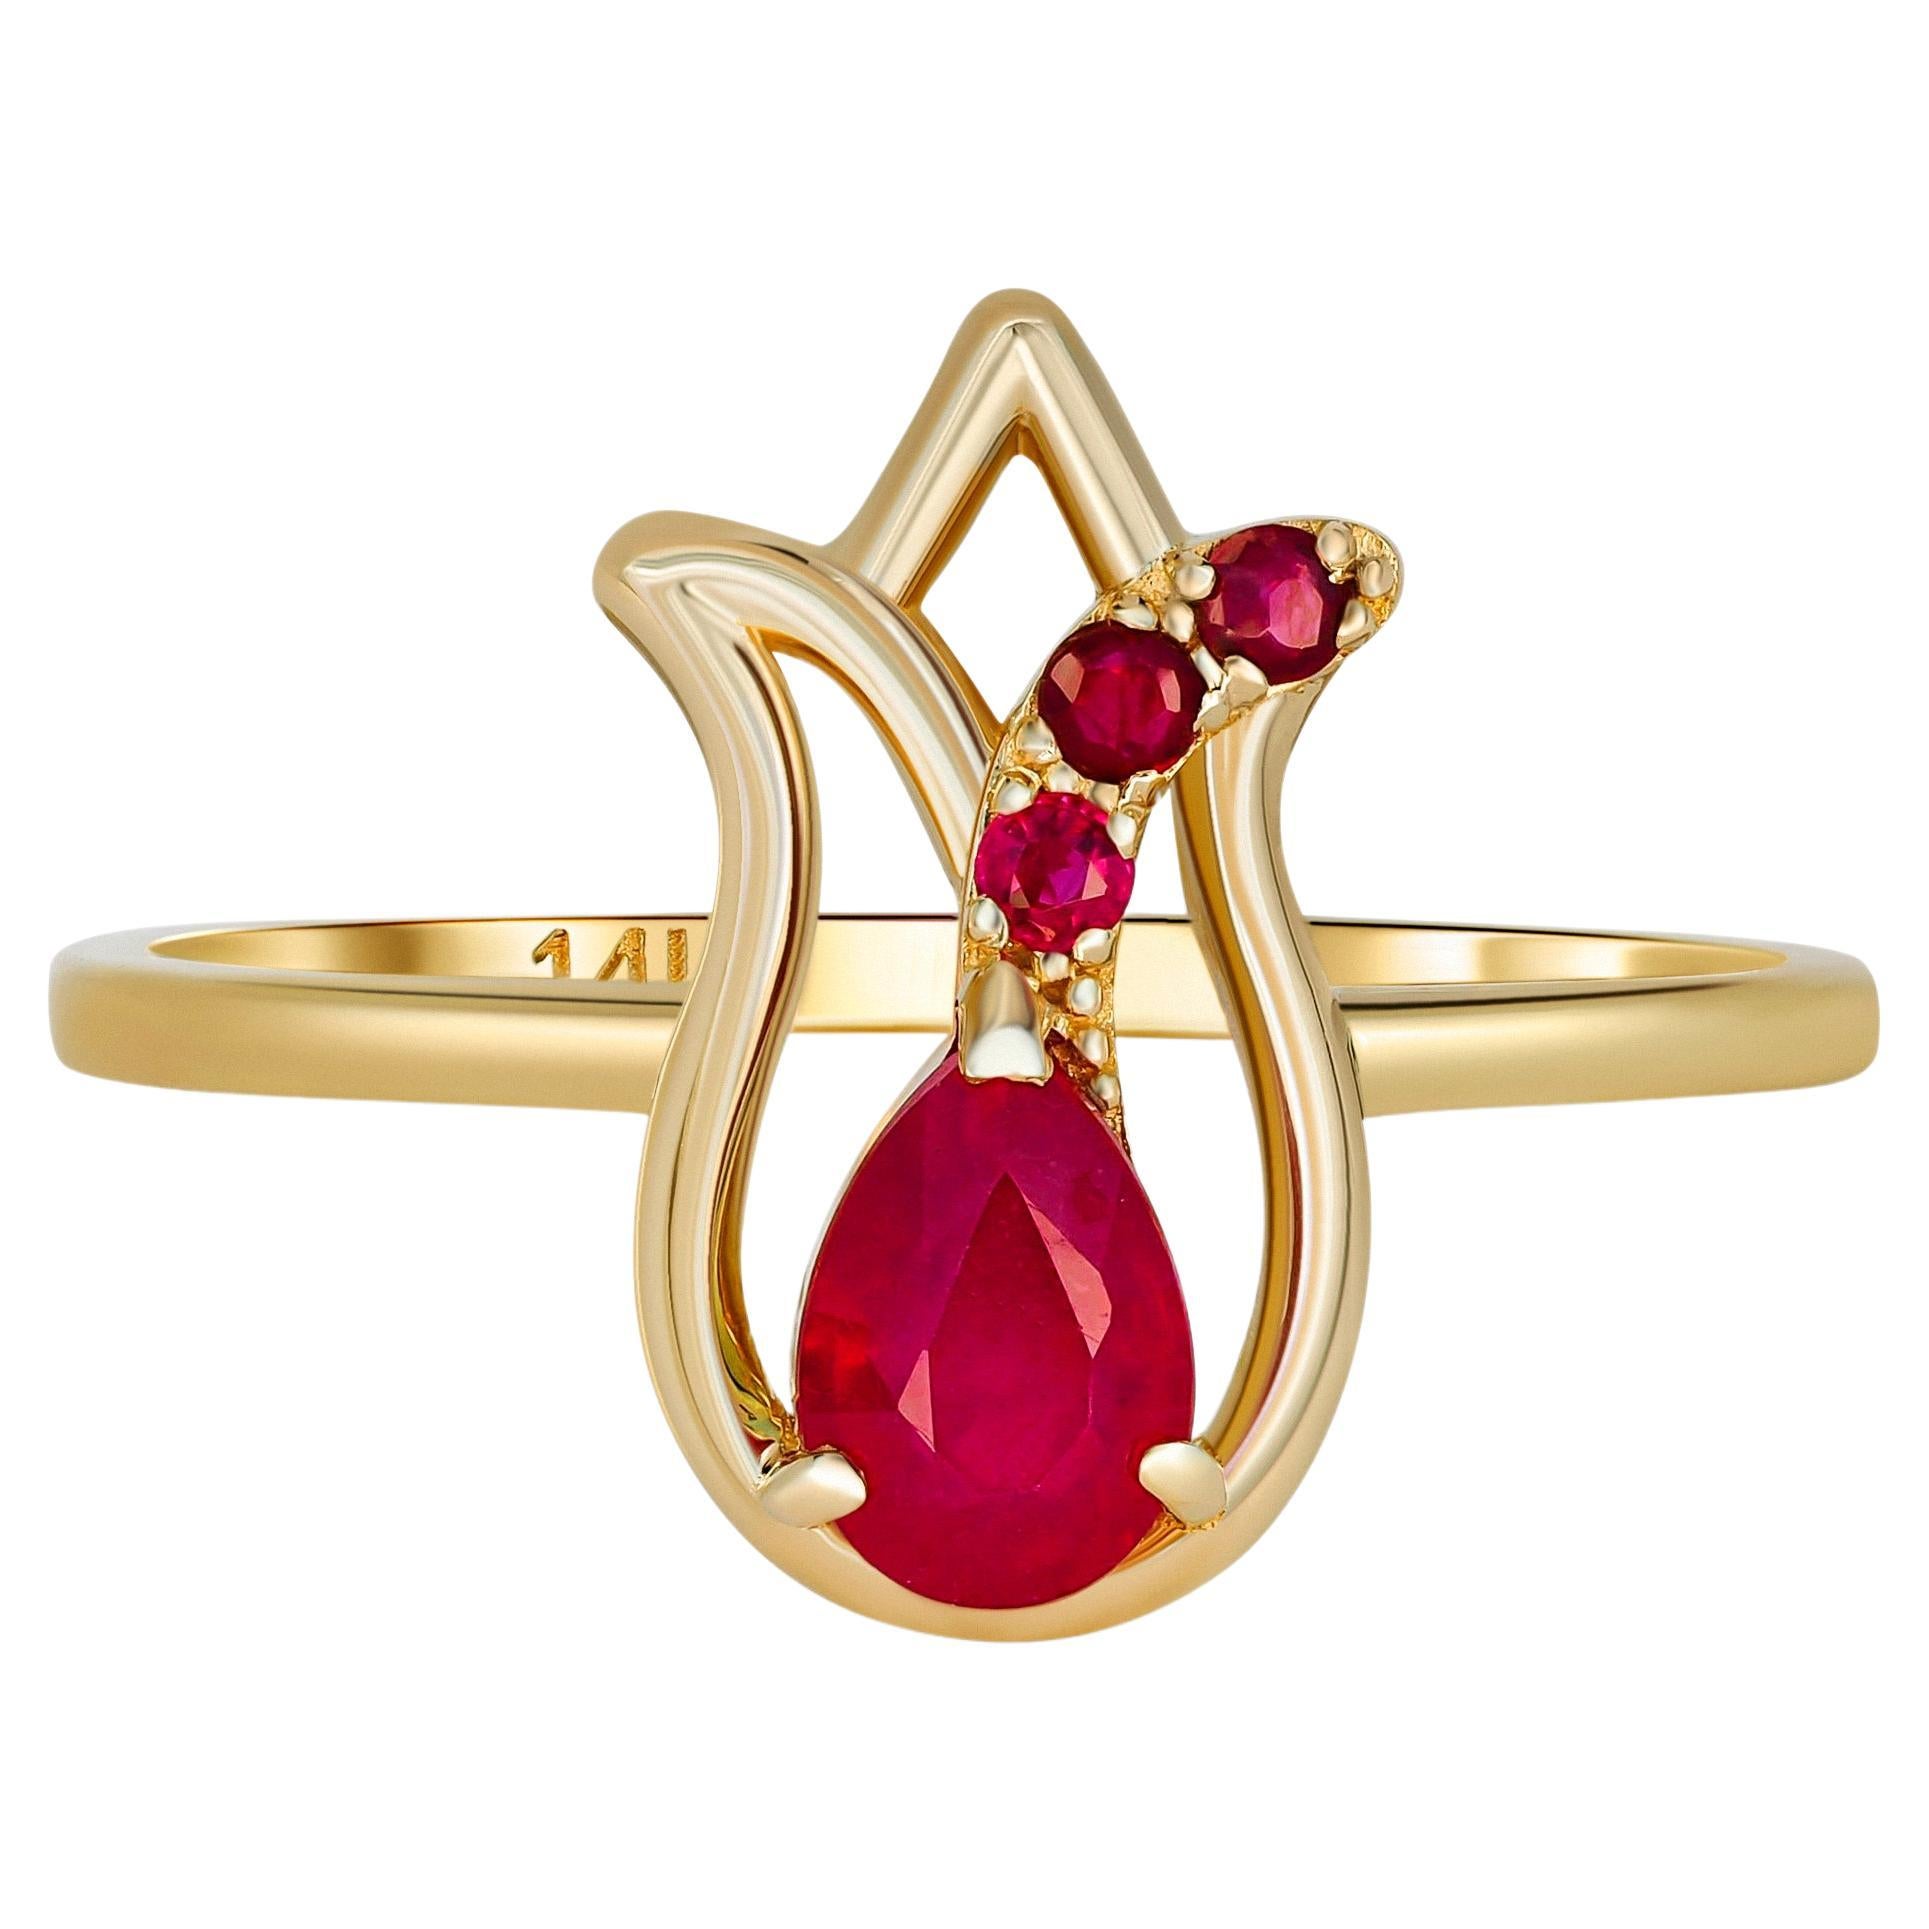 14 Karat Gold Ring with Ruby and Side Rubies. Gold Tulip Flower Ring !